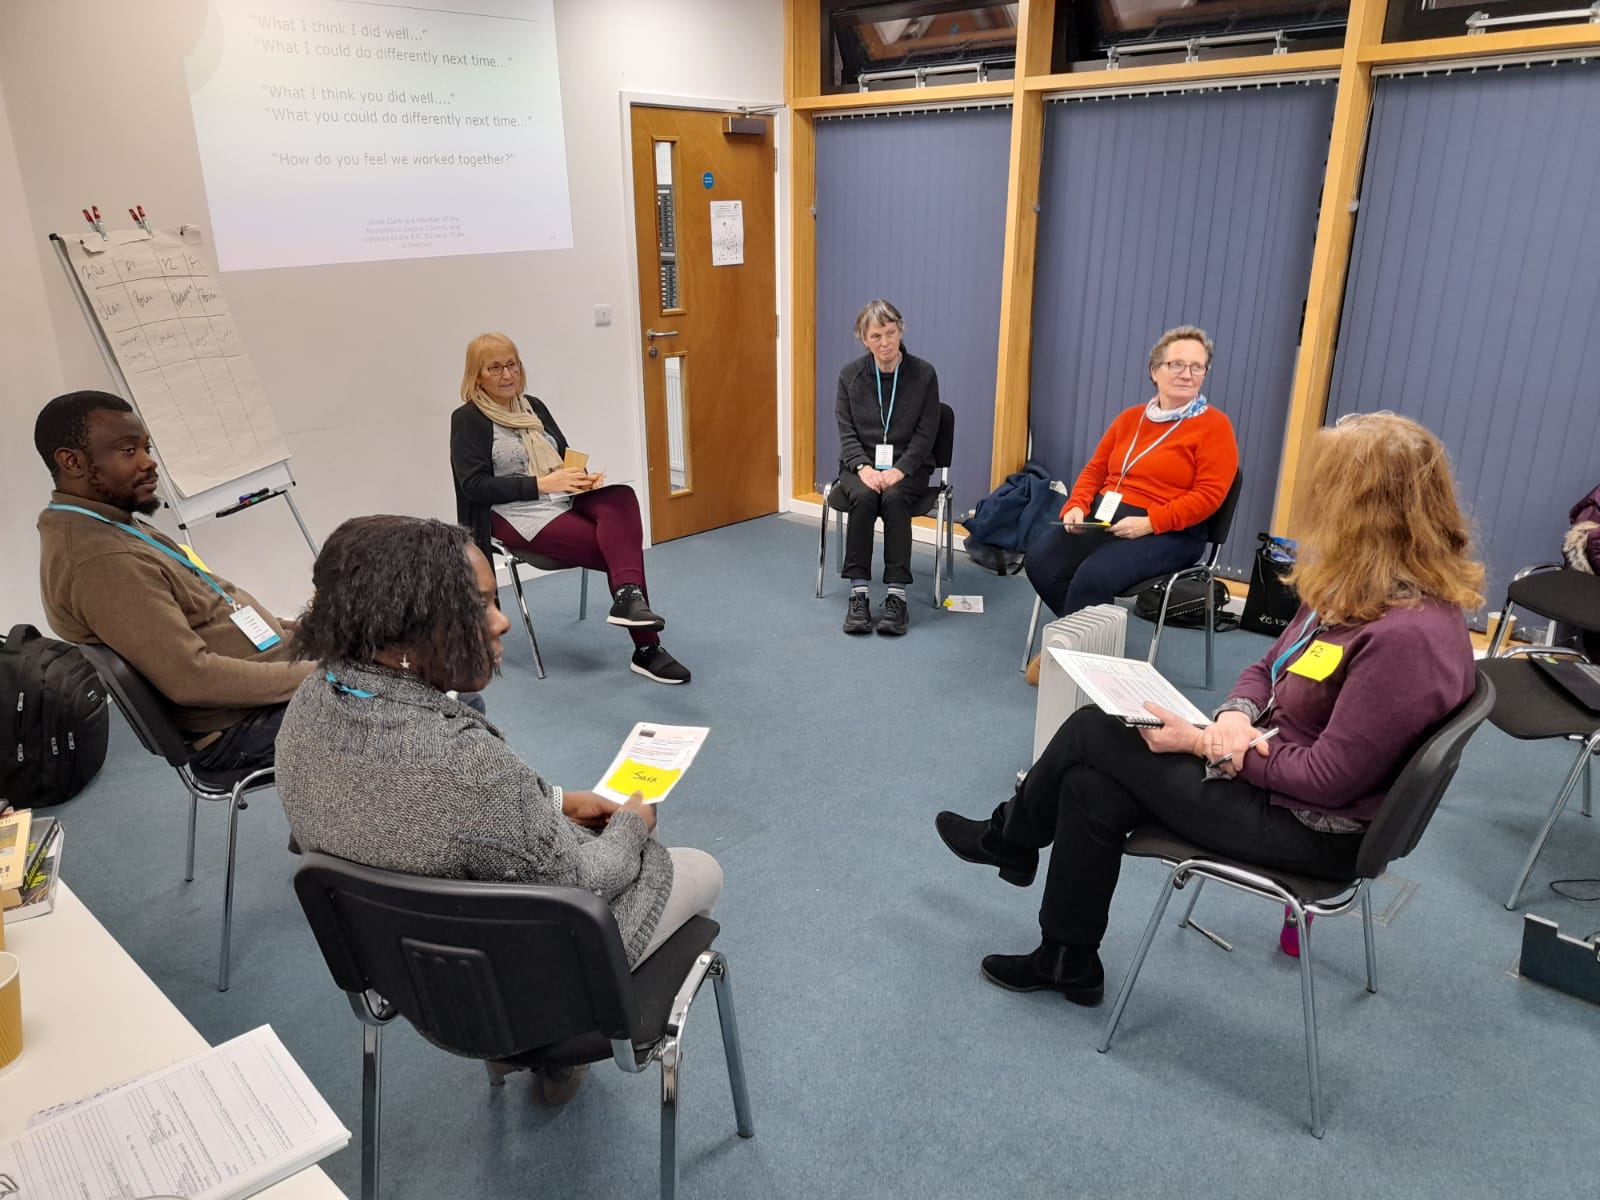 Six Restorative practitioners sit in a circle participating in a conference role play.